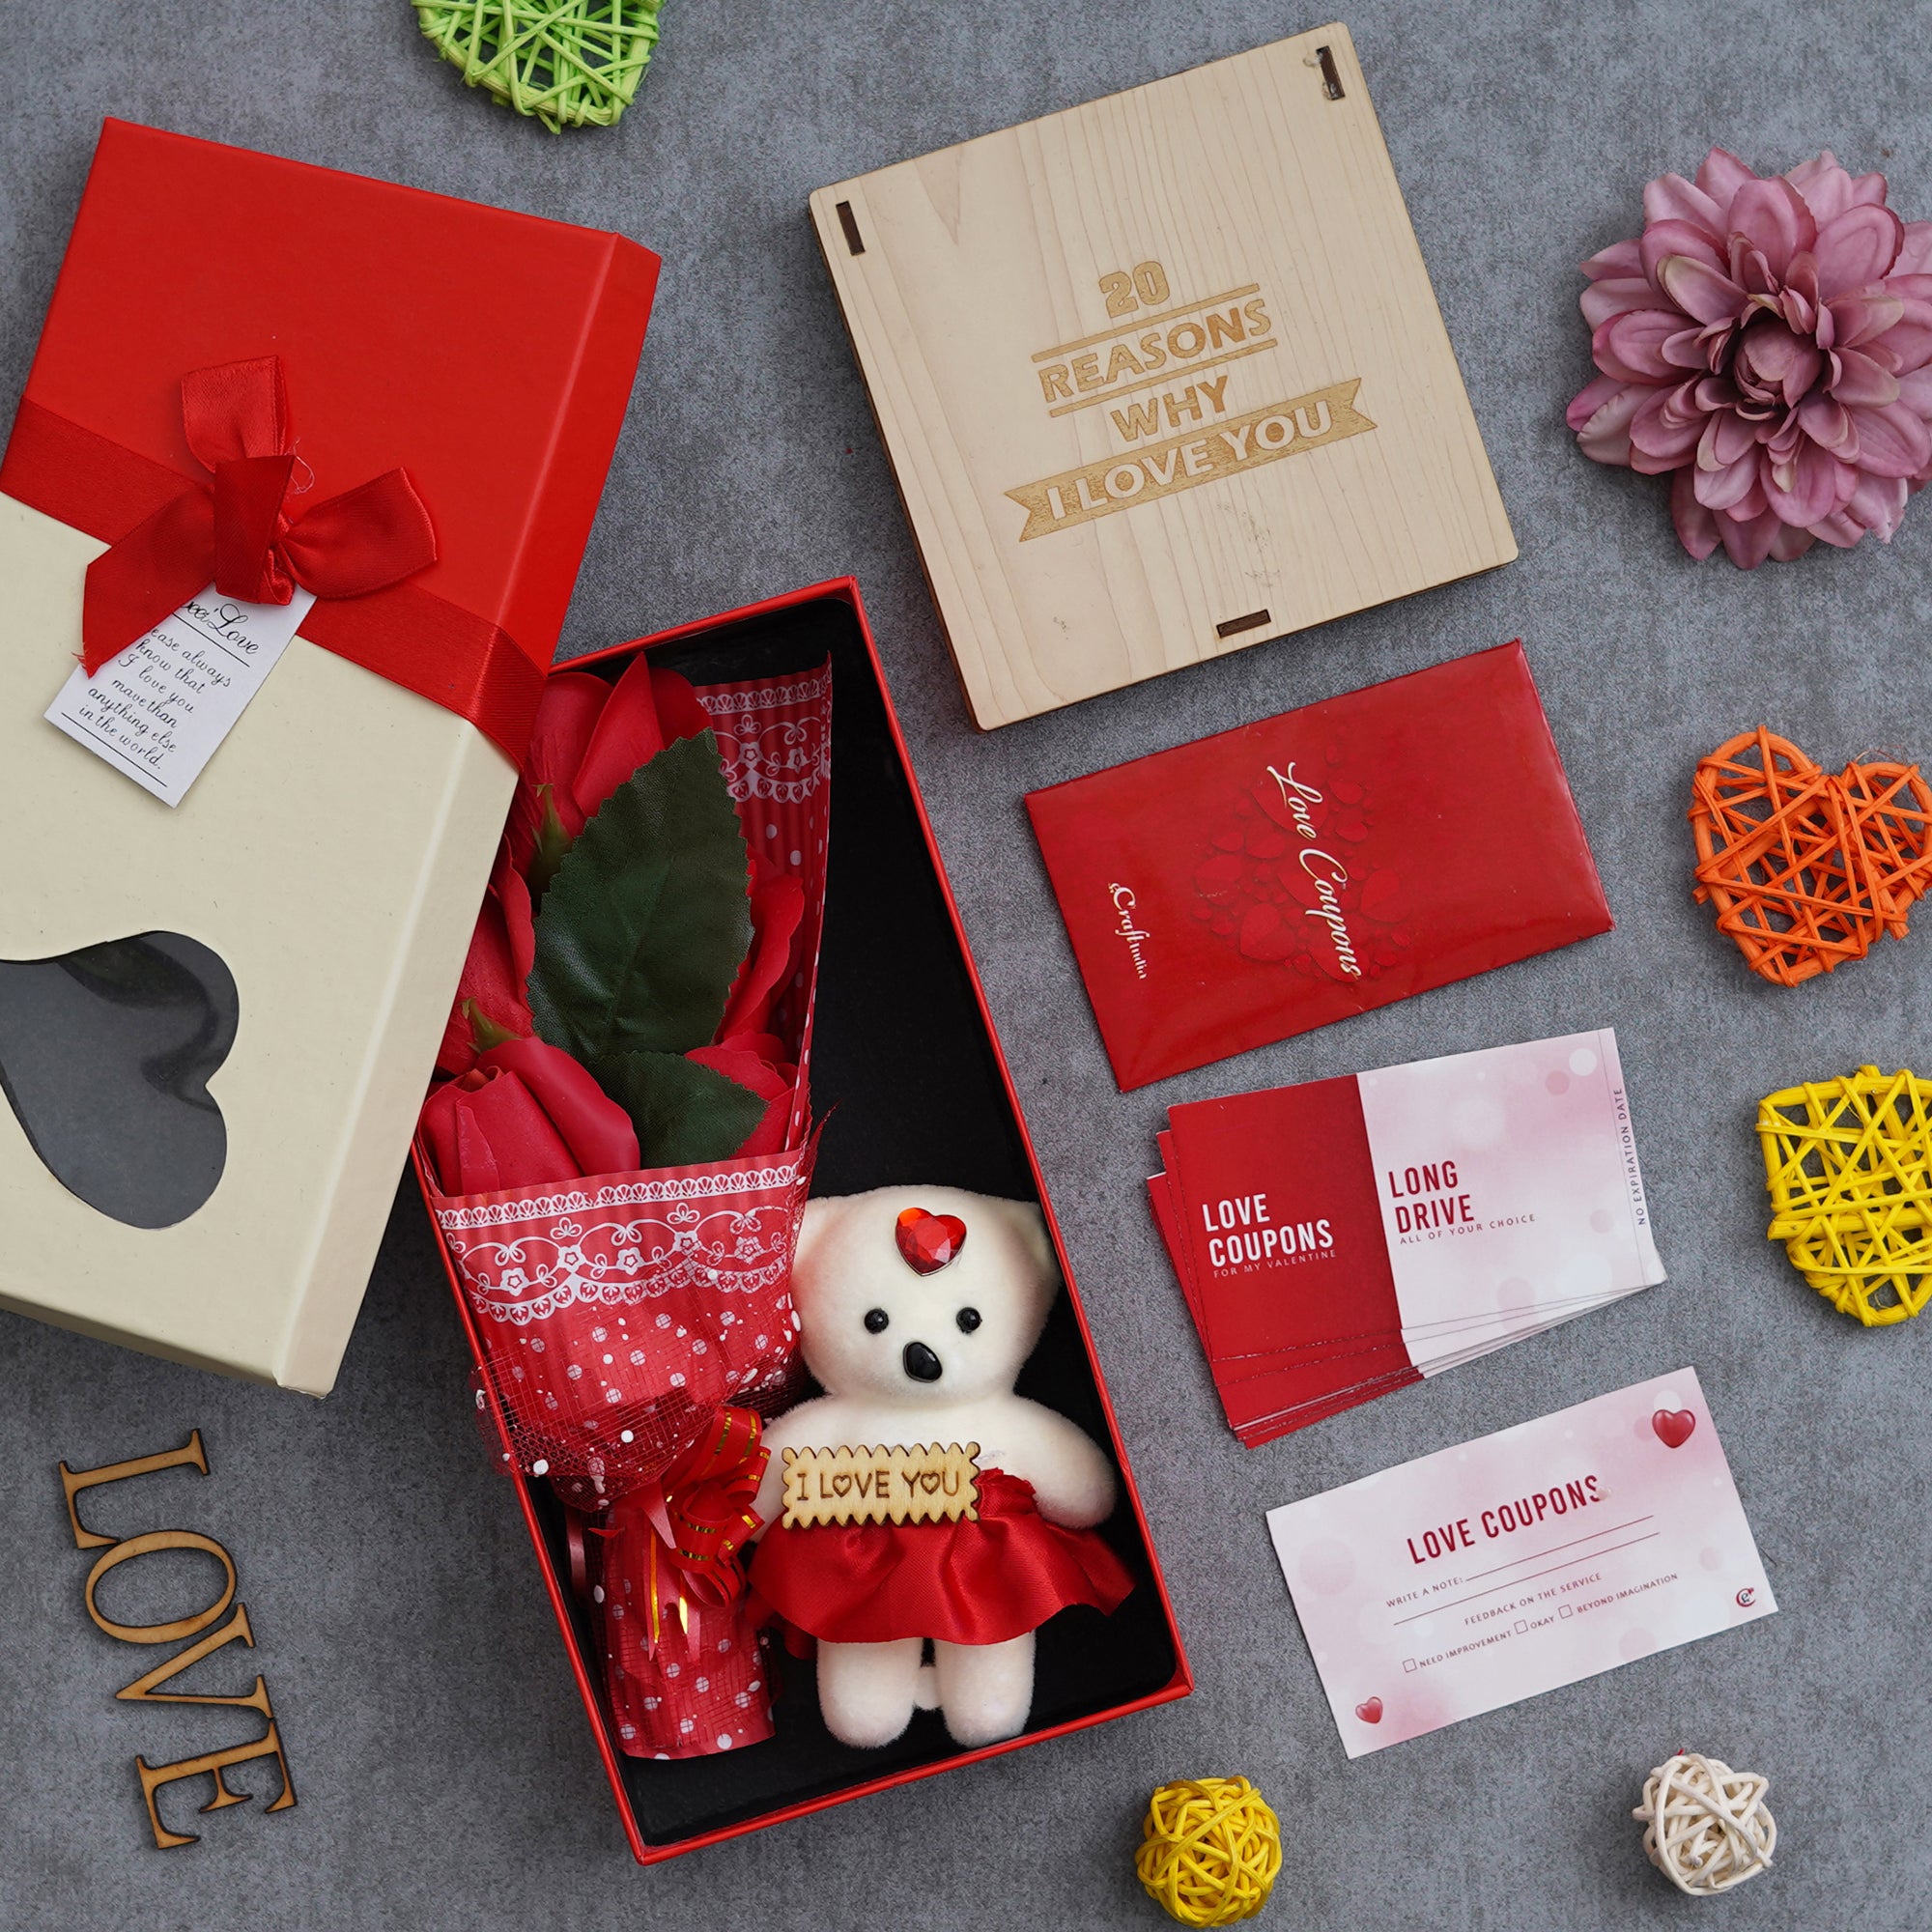 Valentine Combo of Pack of 12 Love Coupons Gift Cards Set, "20 Reasons Why I Love You" Printed on Little Hearts Wooden Gift Set, Red Roses Bouquet and White, Red Teddy Bear Valentine's Rectangle Shaped Gift Box